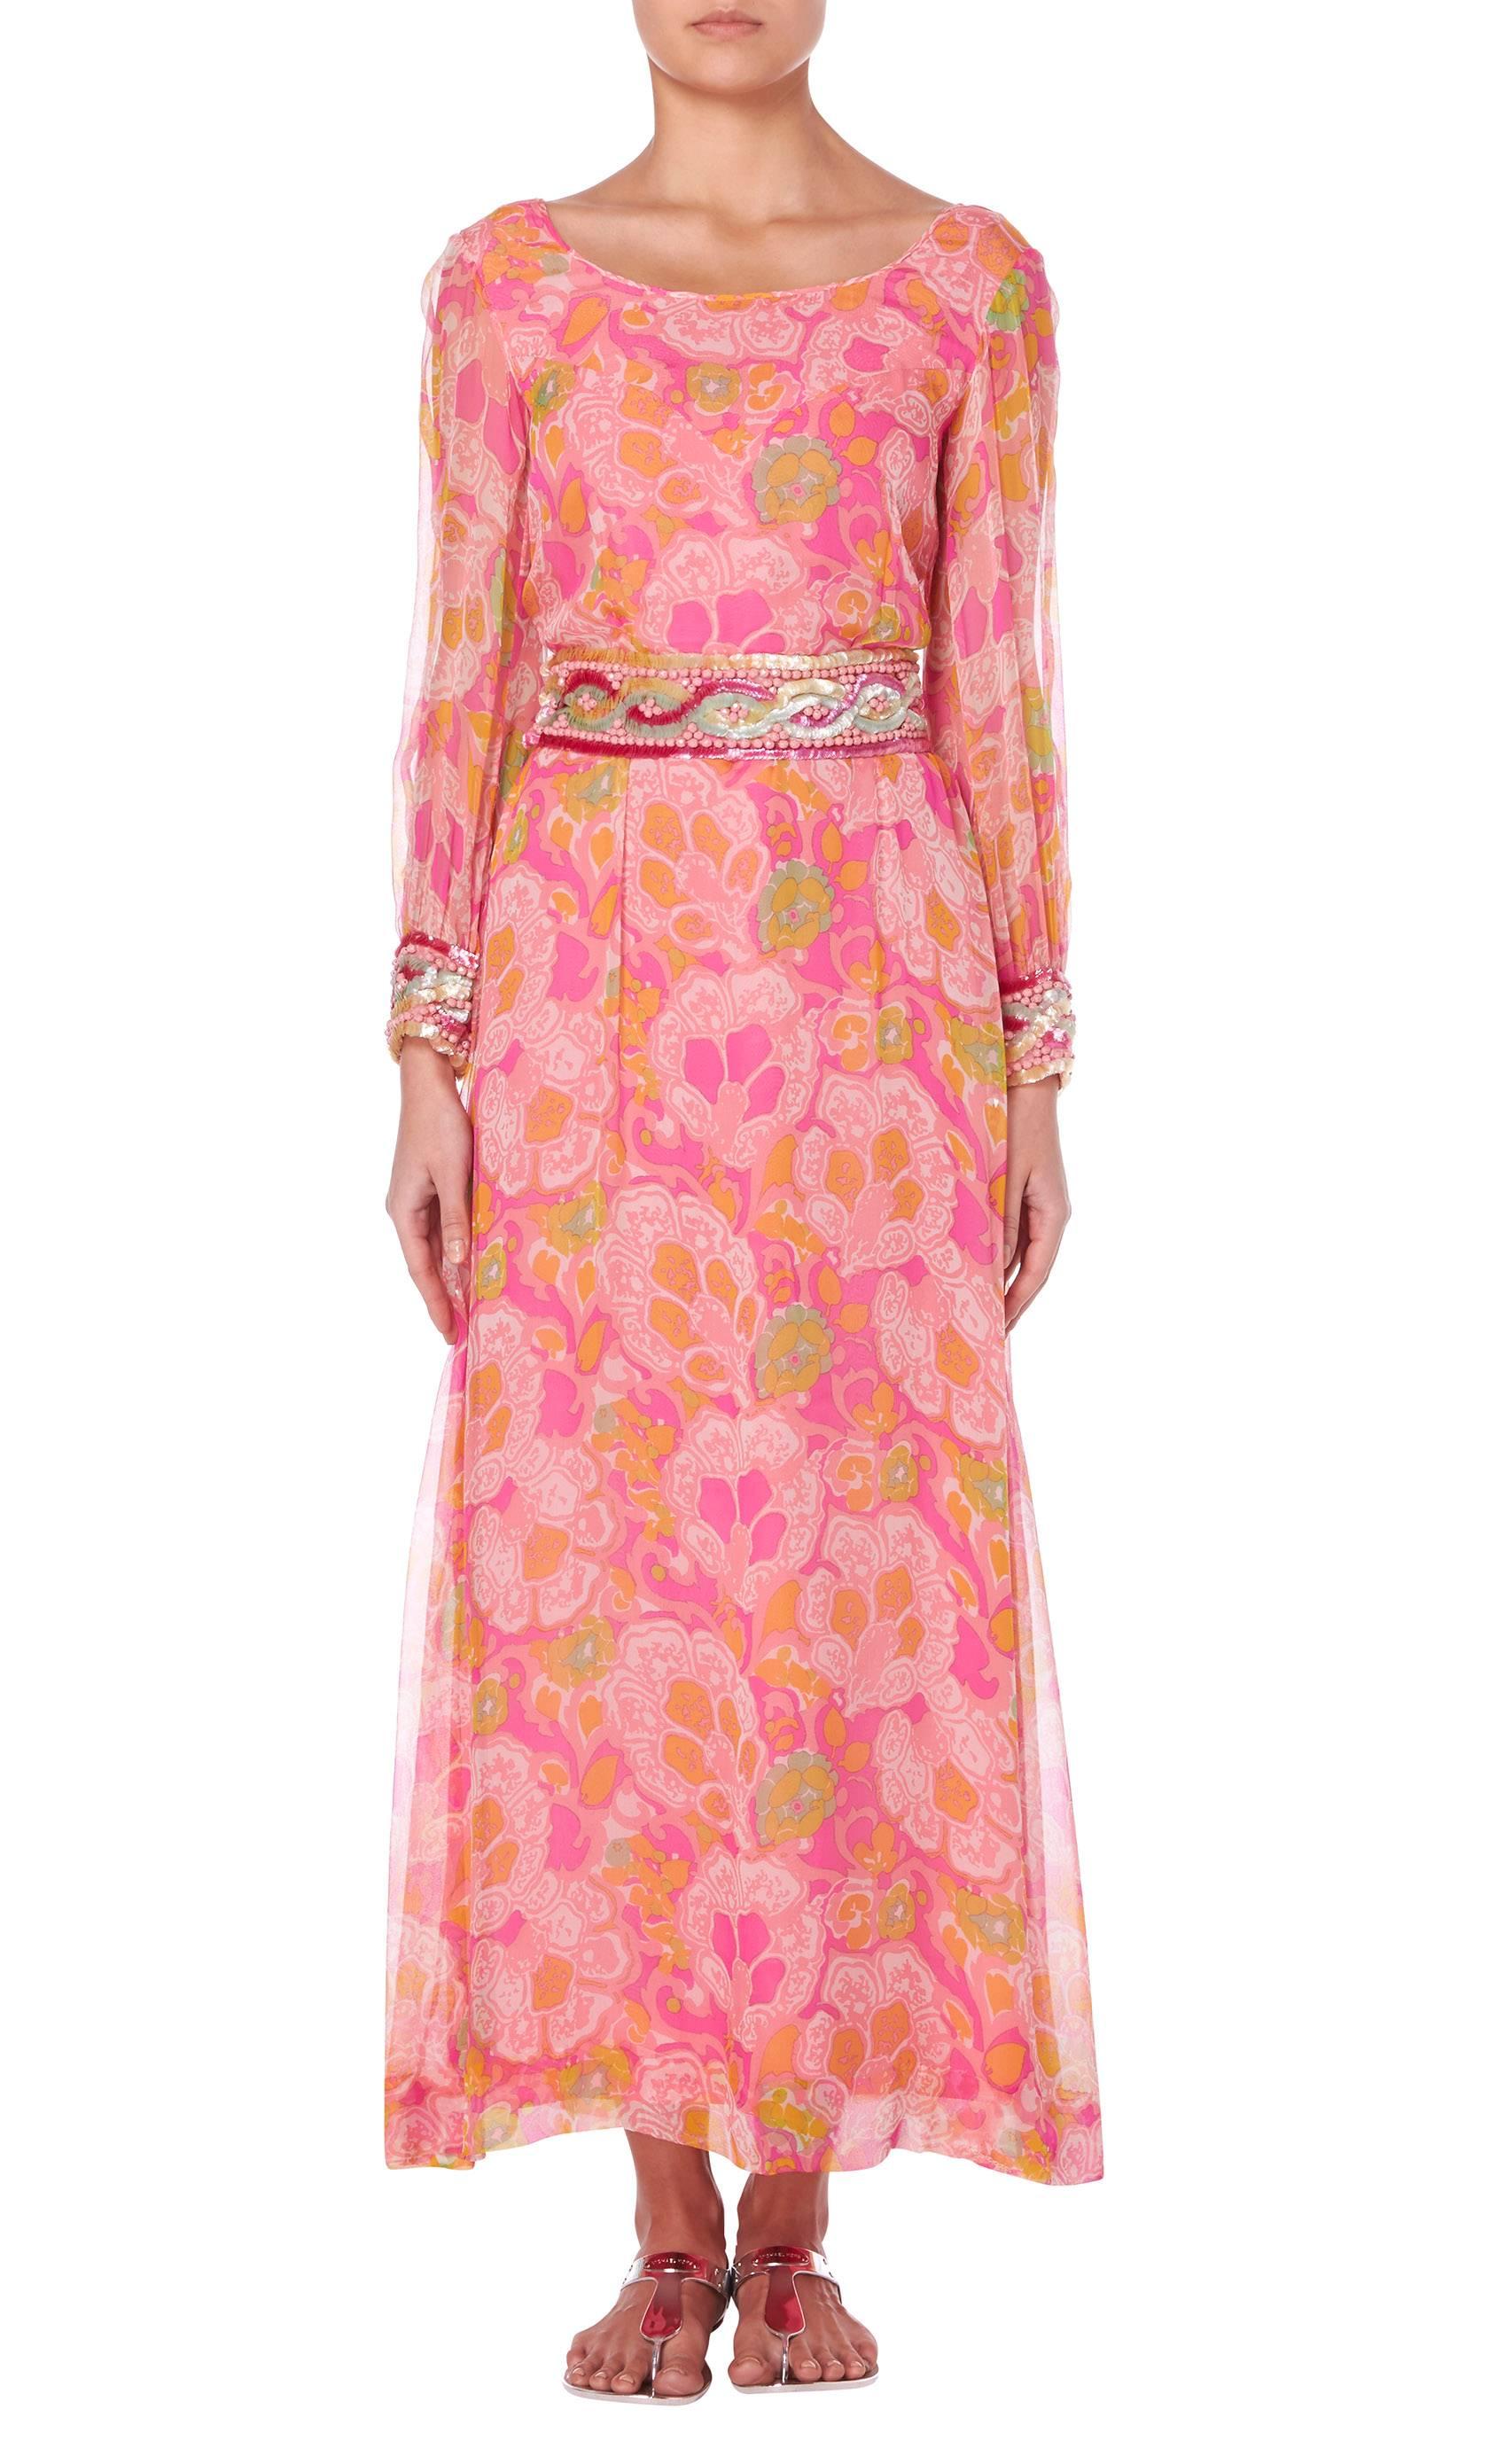 A bright and colourful maxi dress by Hardy Amies, constructed from silk chiffon in an orange, pink and green psychedelic print. The waistband is embellished with sequins and beads, drawing out the contrasting colours of the print. The dress is fully